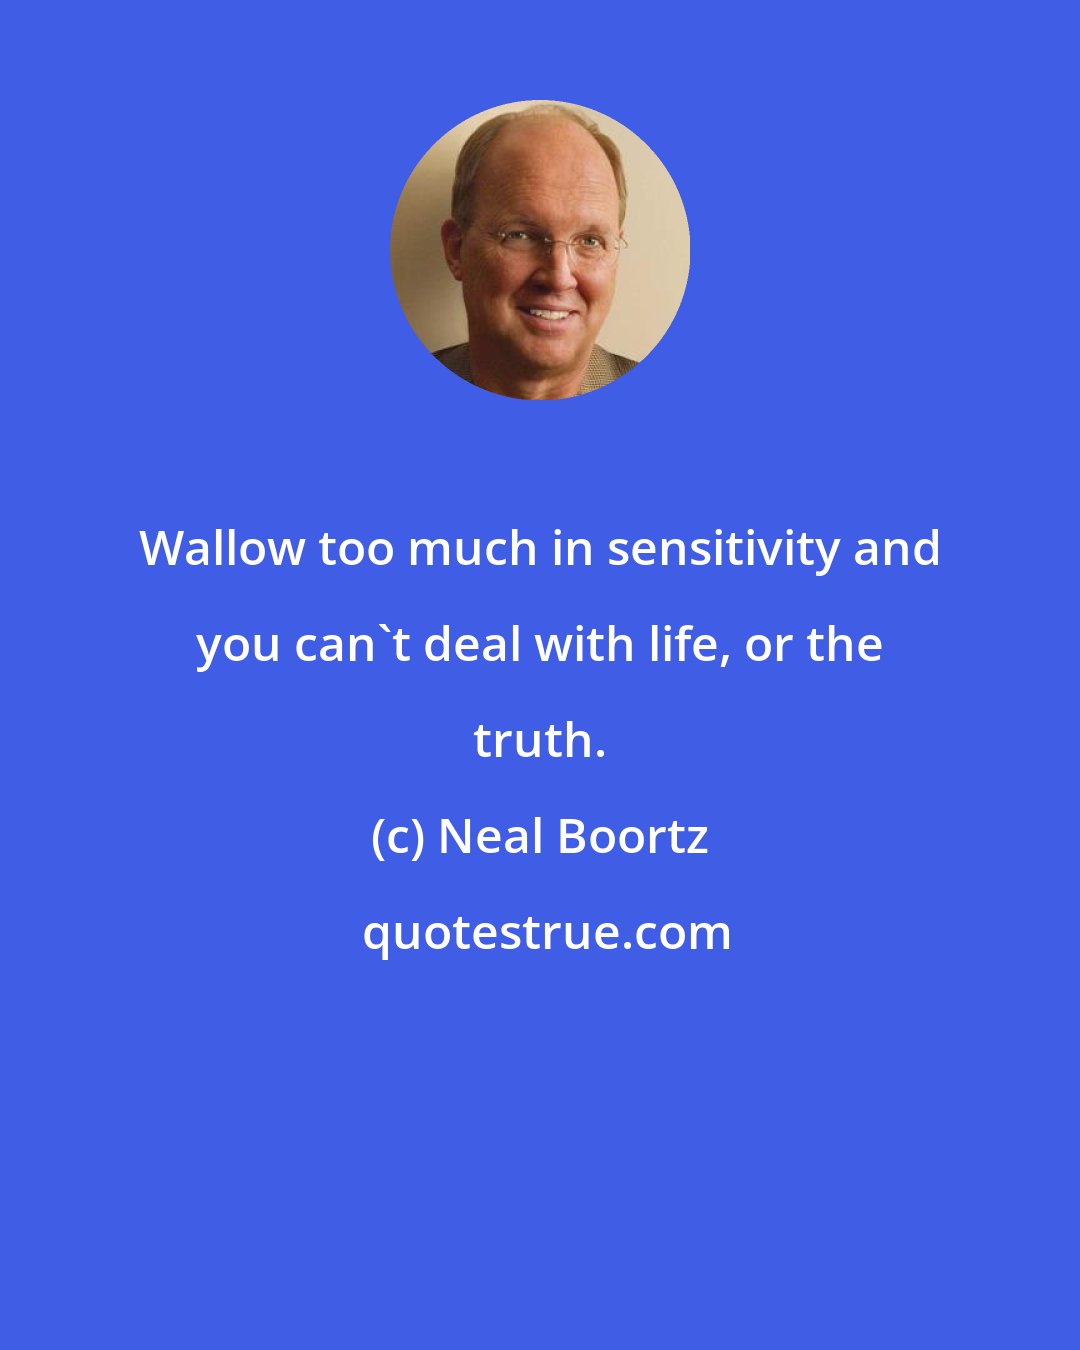 Neal Boortz: Wallow too much in sensitivity and you can't deal with life, or the truth.